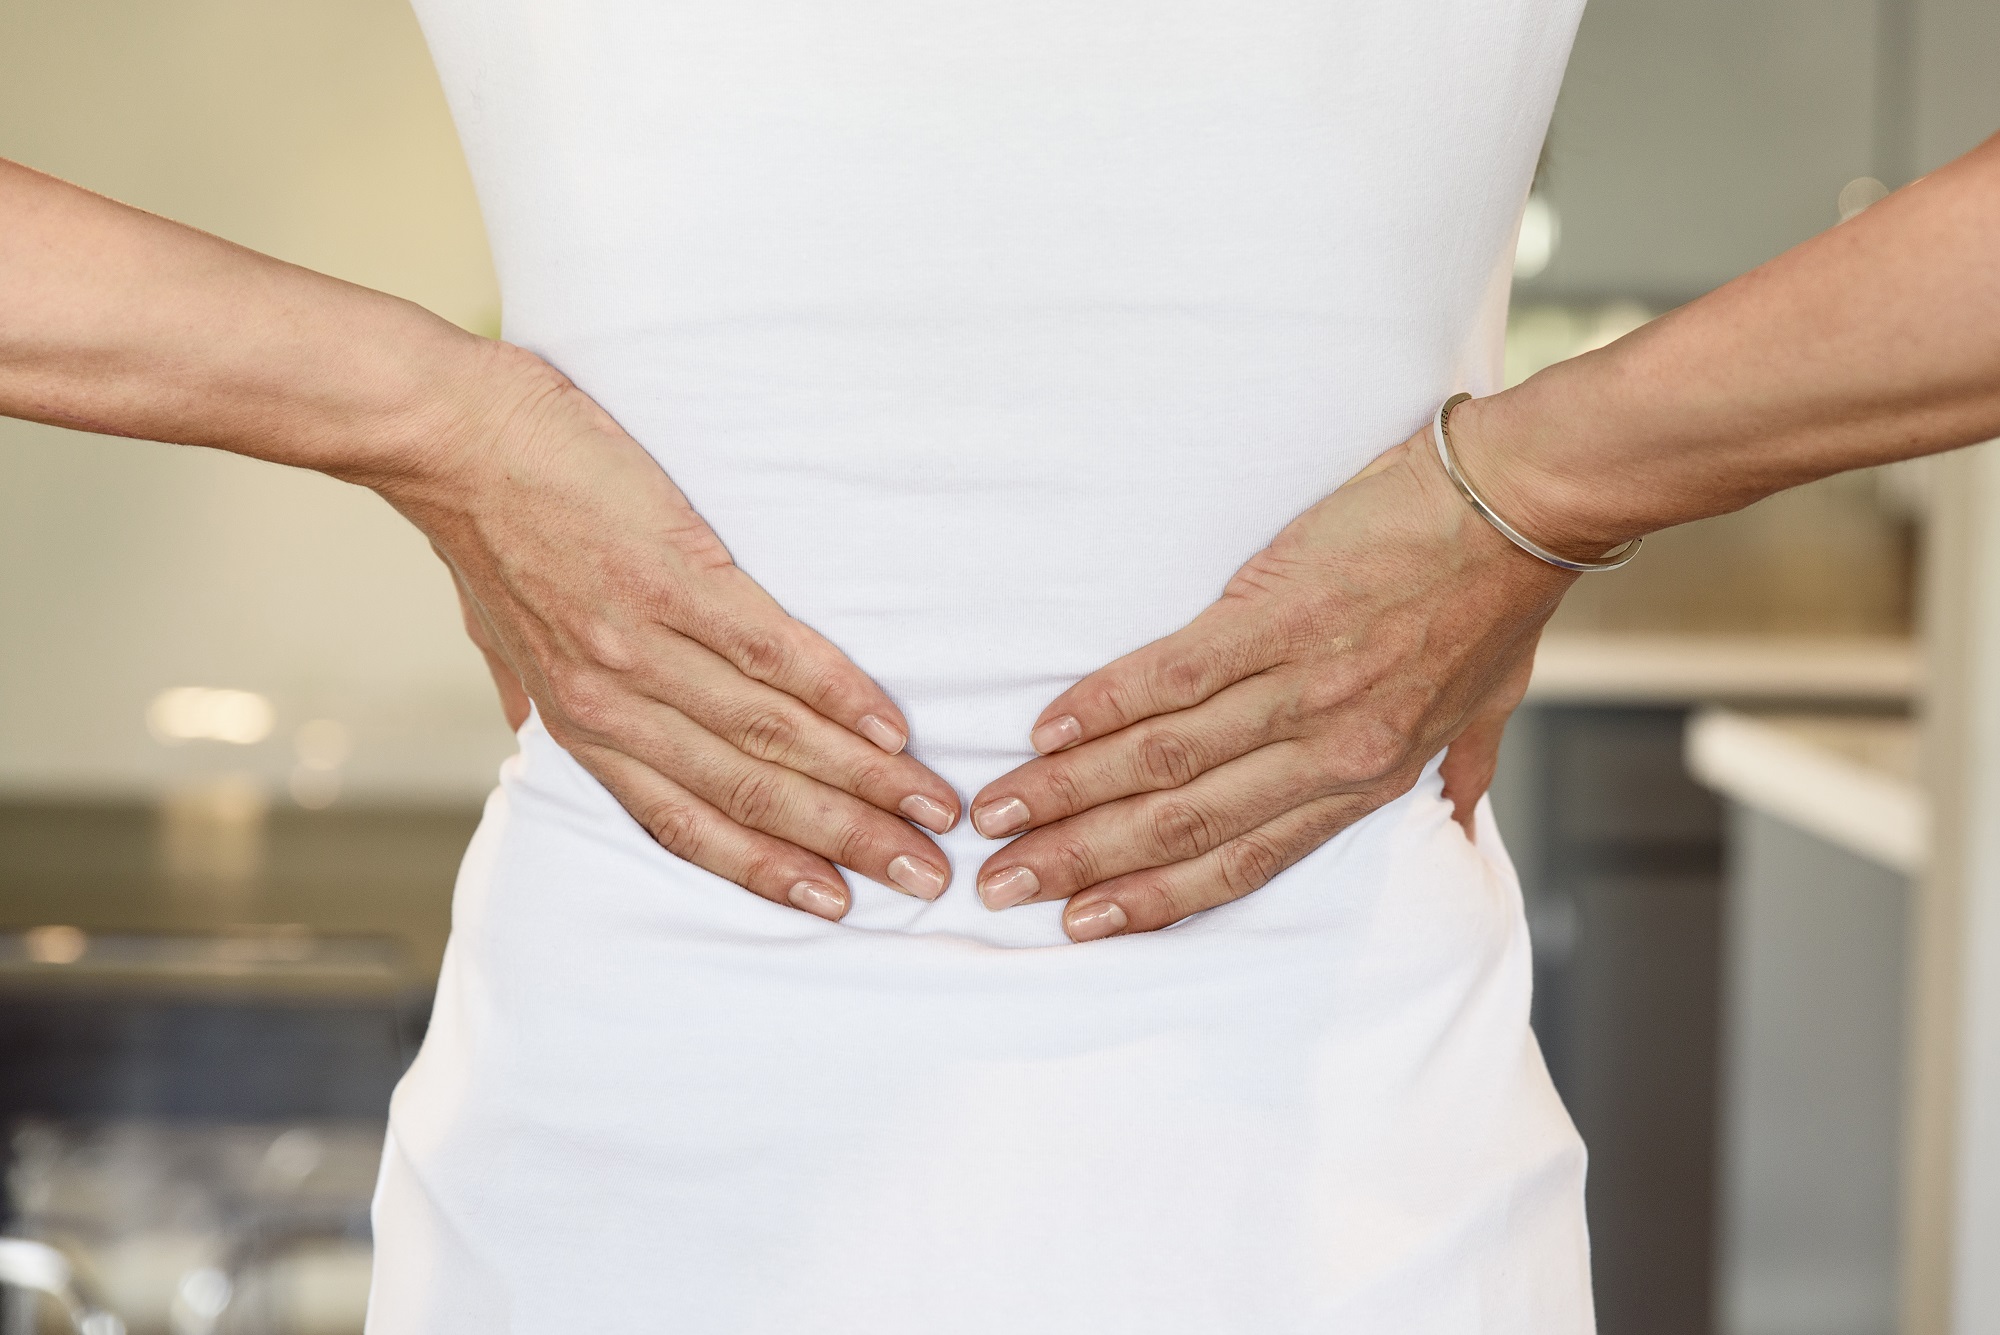 Chronic Low Back Pain Levels Vary Between Sex and Race ...